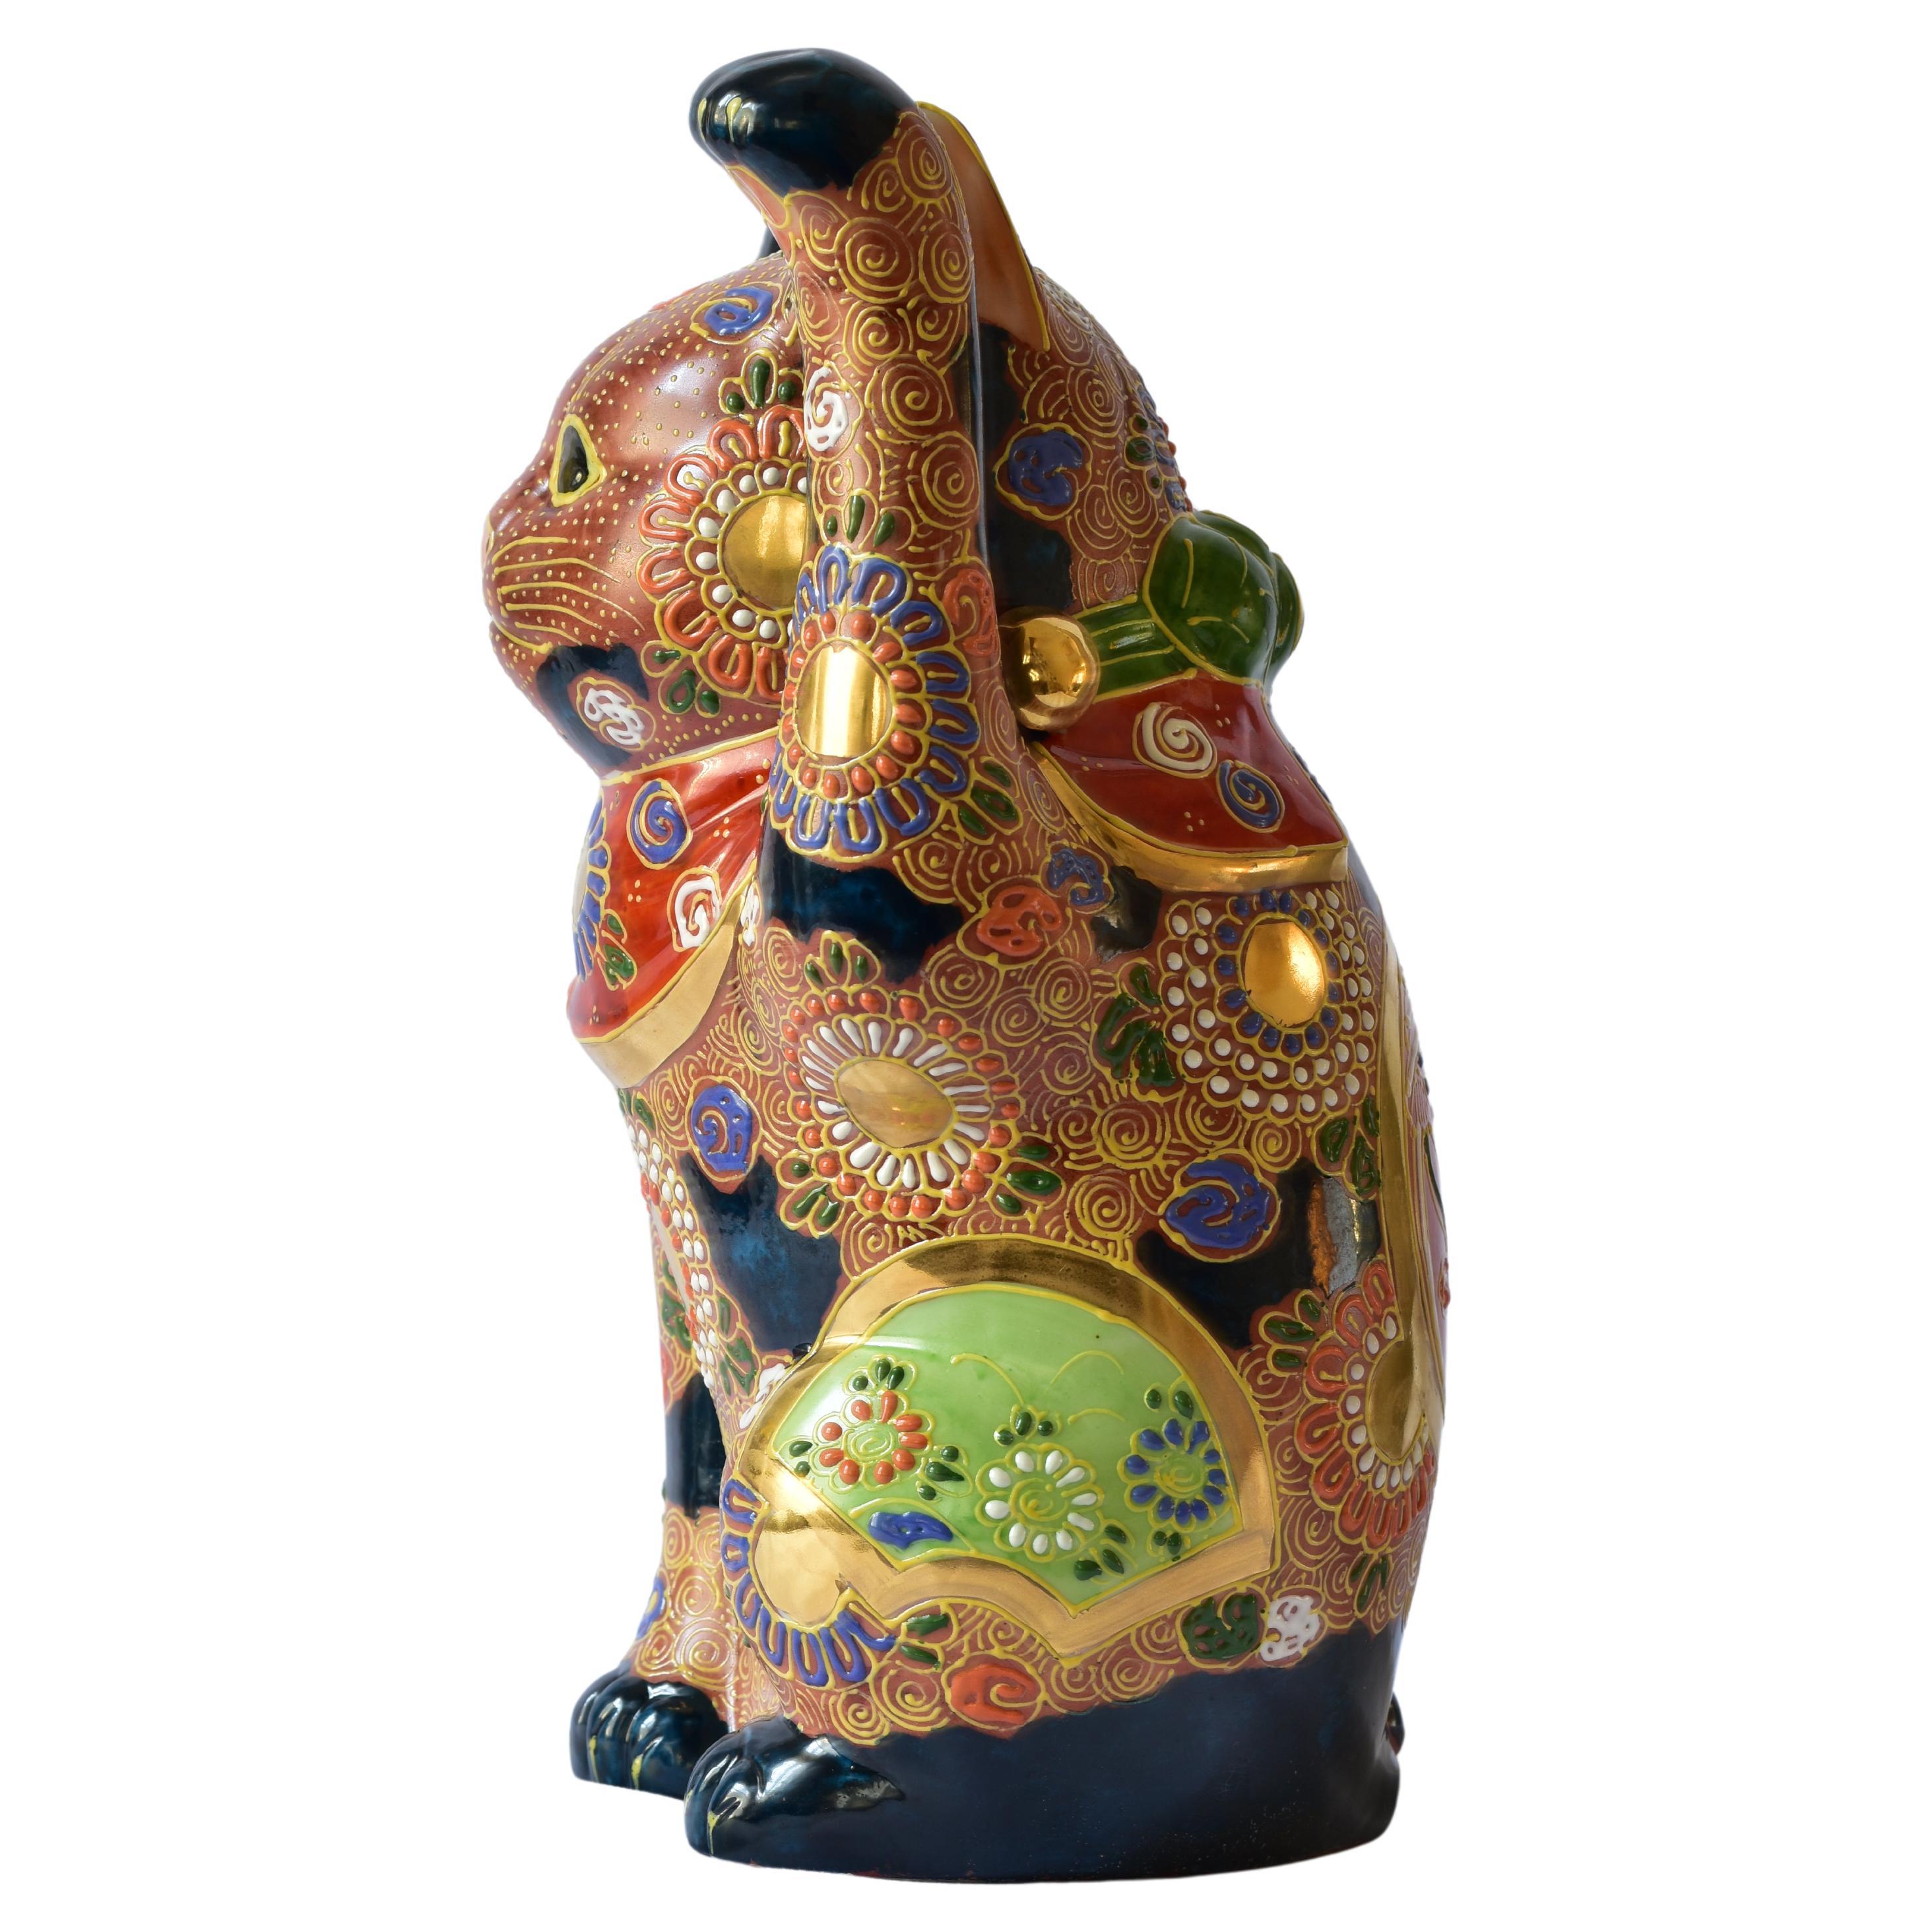 Exquisite Japanese Contemporary porcelain beckoning cat, a uniquely and intricately gilded and hand painted porcelain sculpture from the Kutani region of Japan. The cat raising his left paw is adorned with multiple golden medallions and is covered